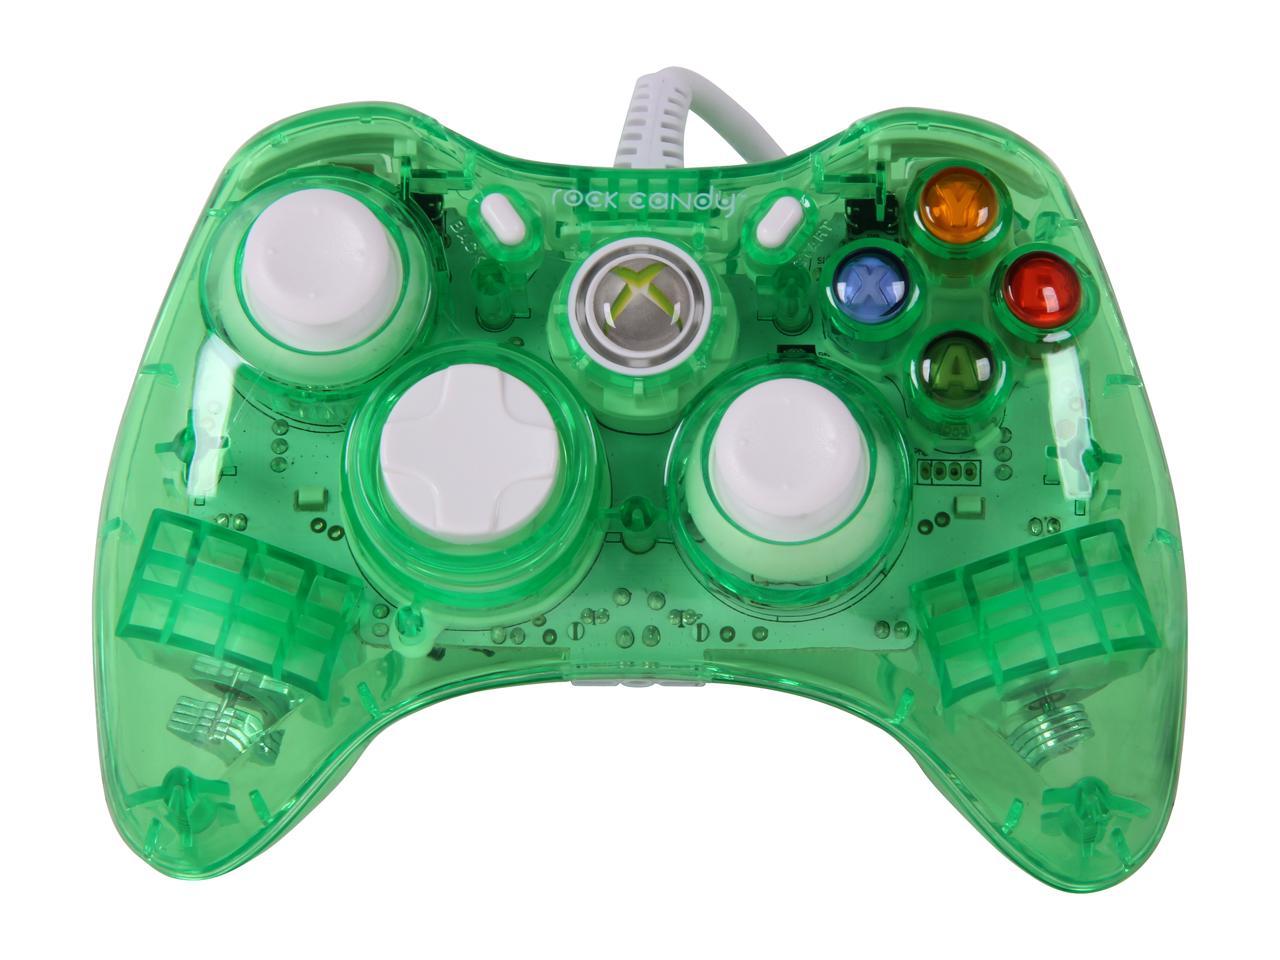 xbox 360 rock candy controller world of warcraft